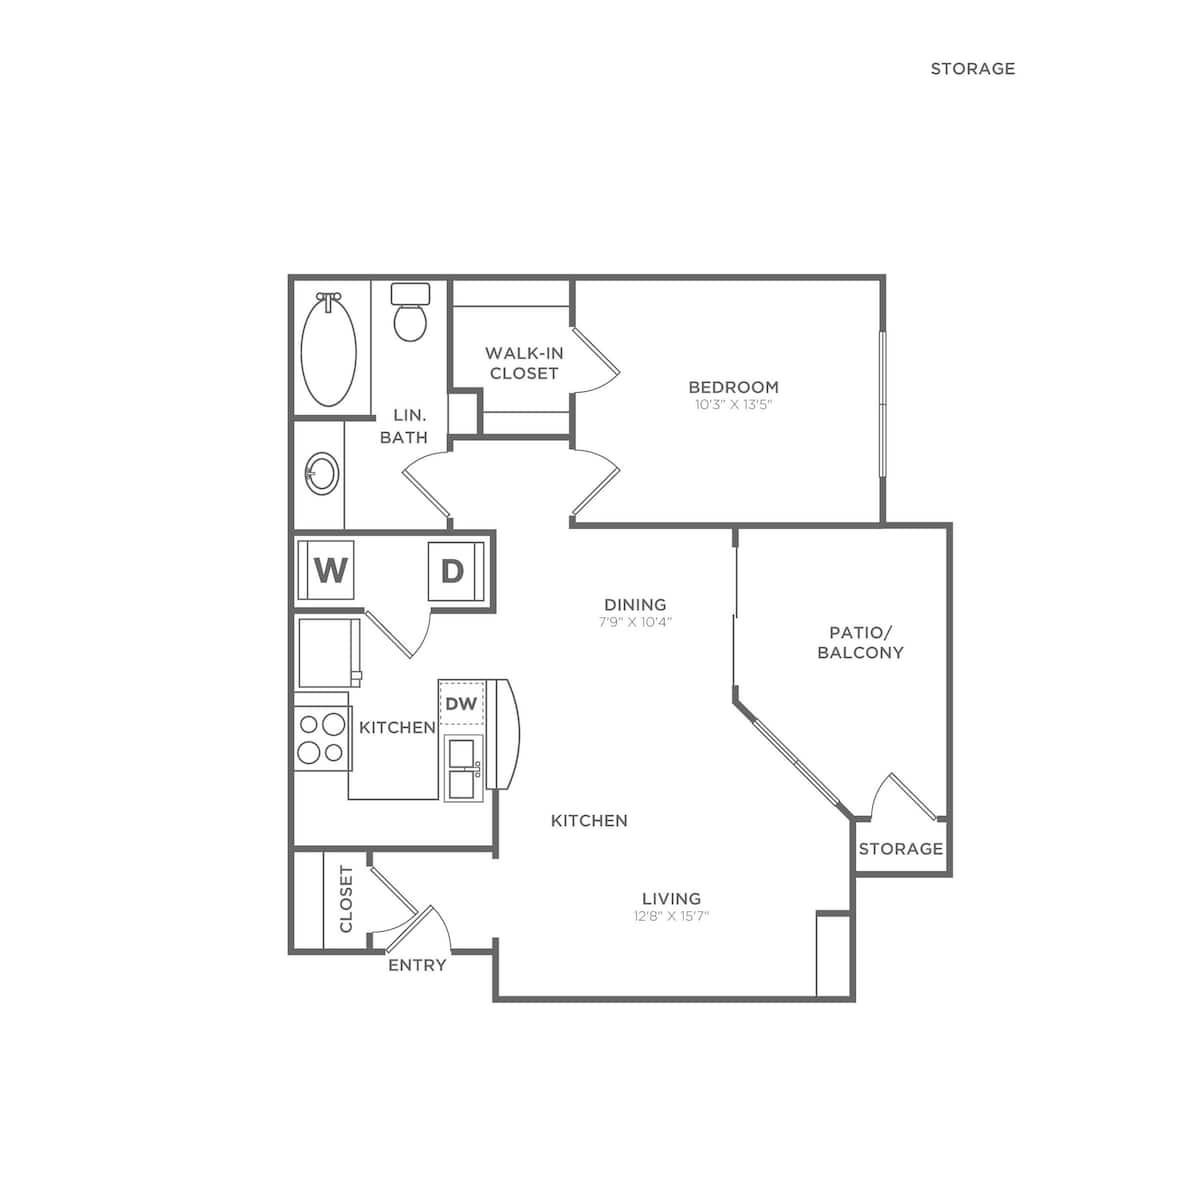 Floorplan diagram for A1-Tailored, showing 1 bedroom